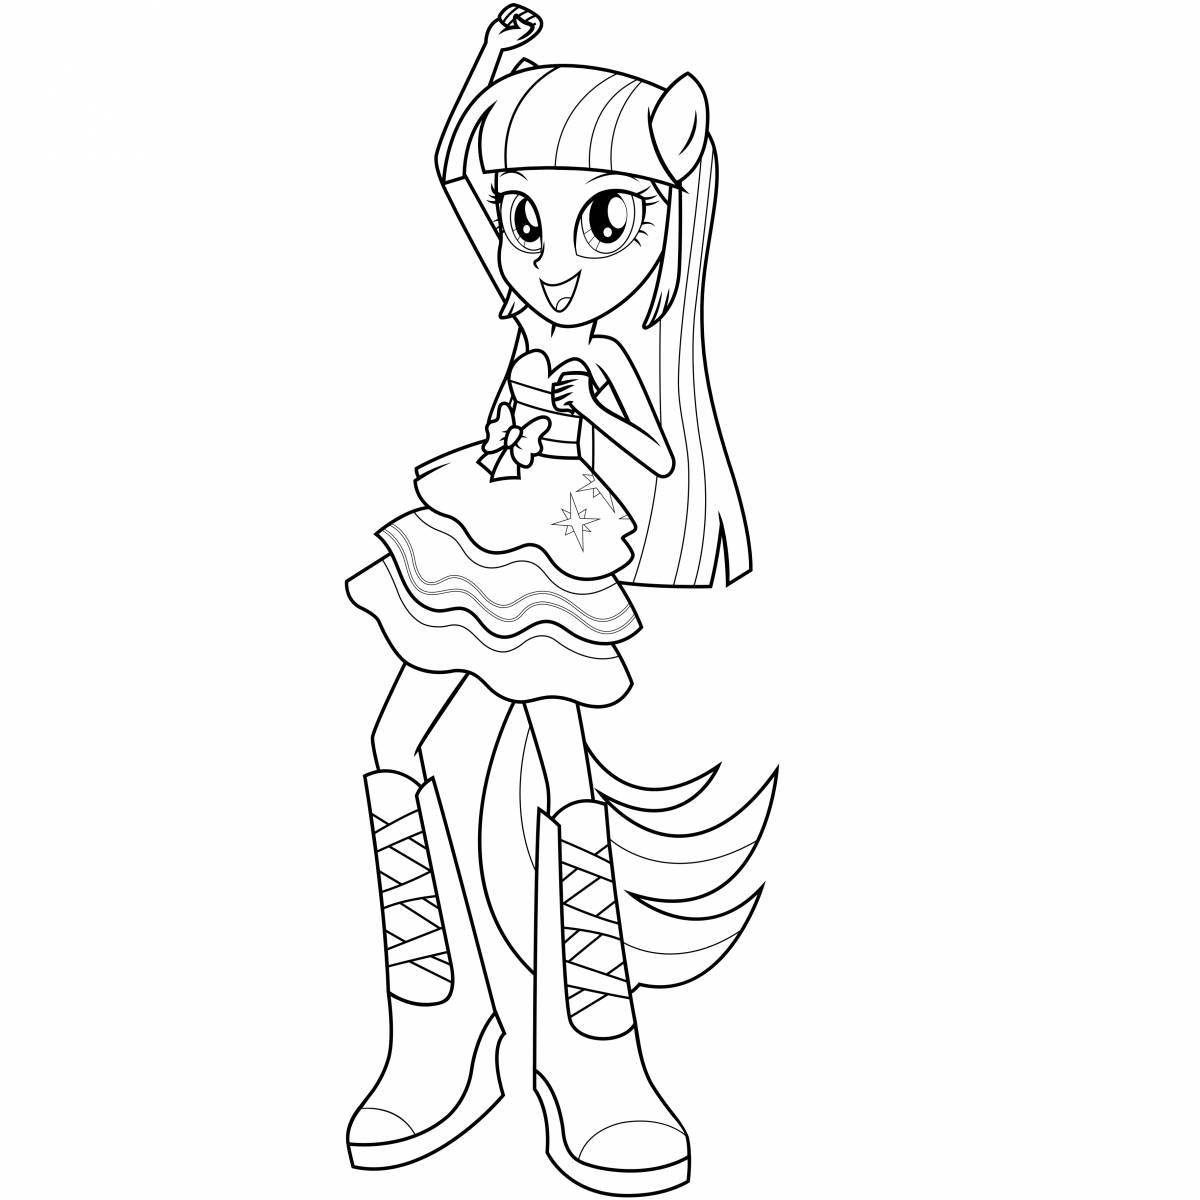 Colorful pony people coloring page